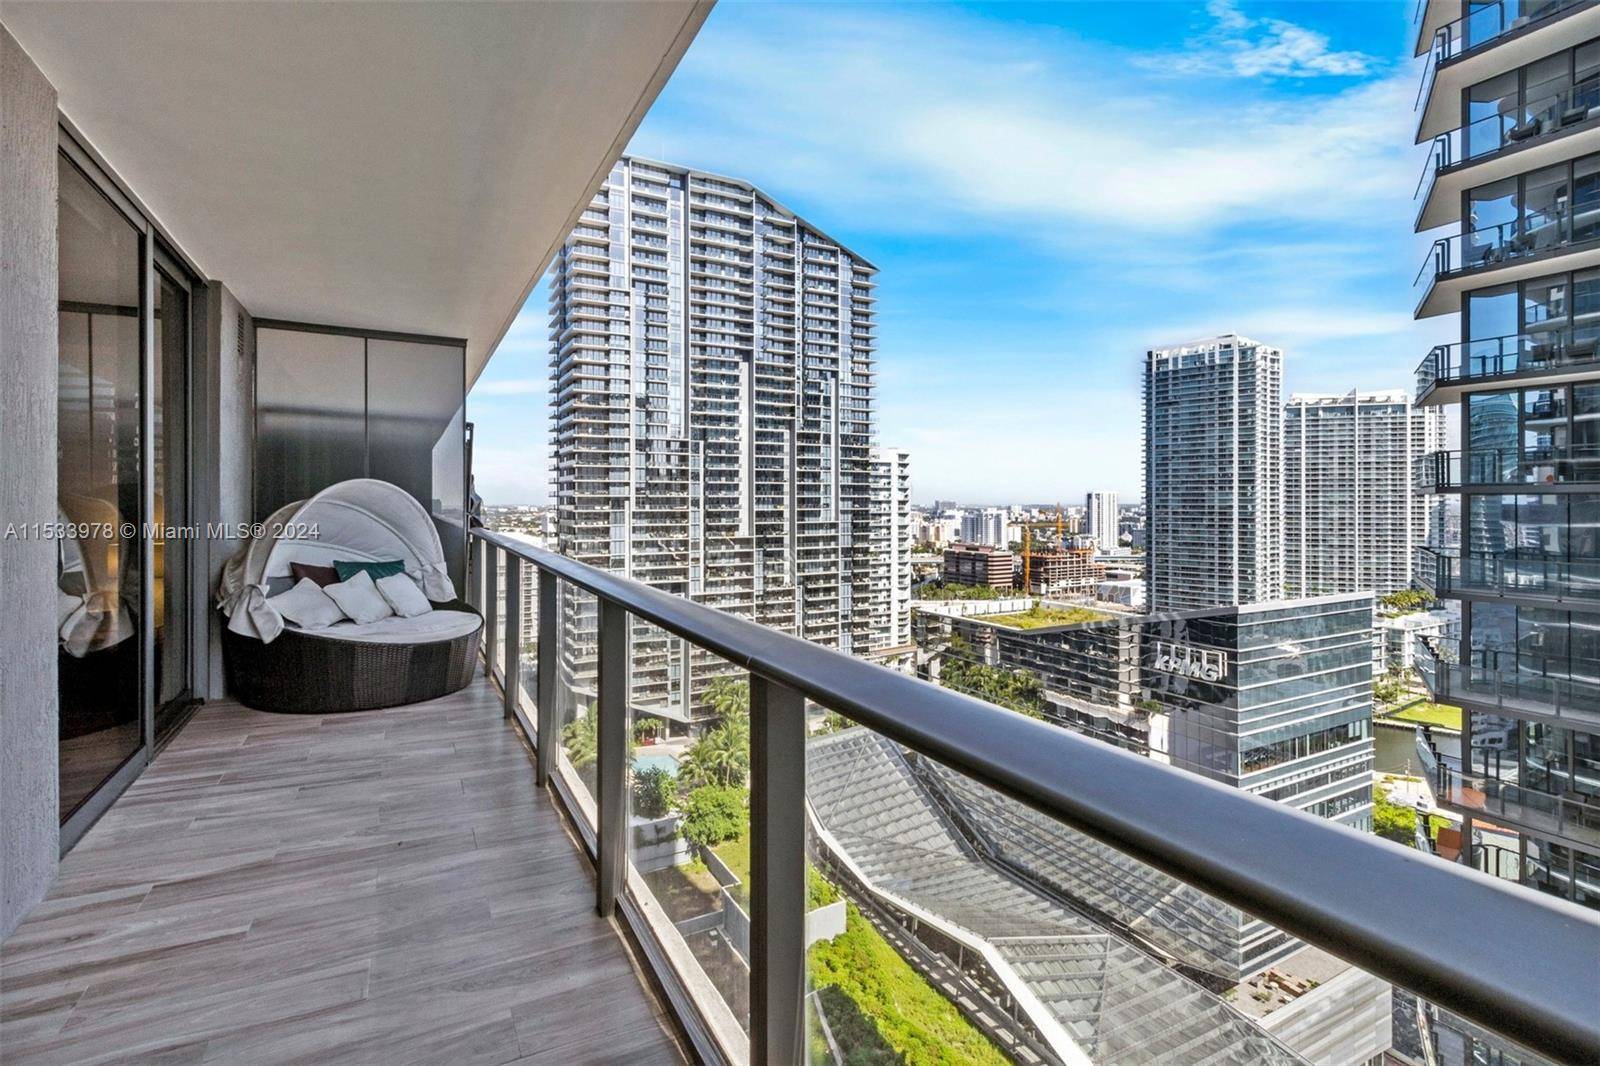 SLS Lux is a luxury residence in the middle of Brickell directly next to Brickell City Center.